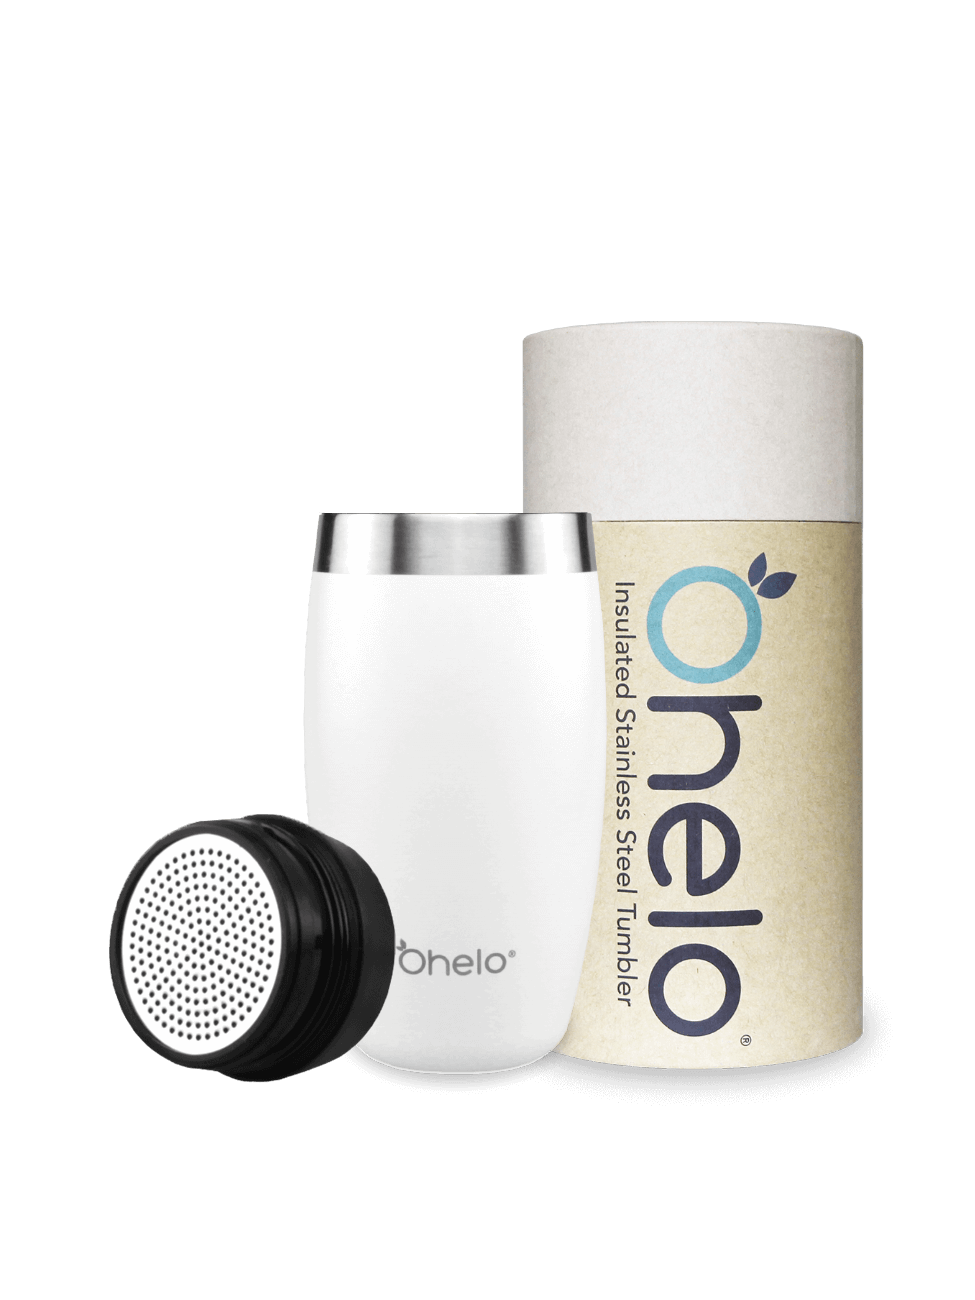 Ohelo insulated travel mug in white with removable tea strainer and recycled packaging